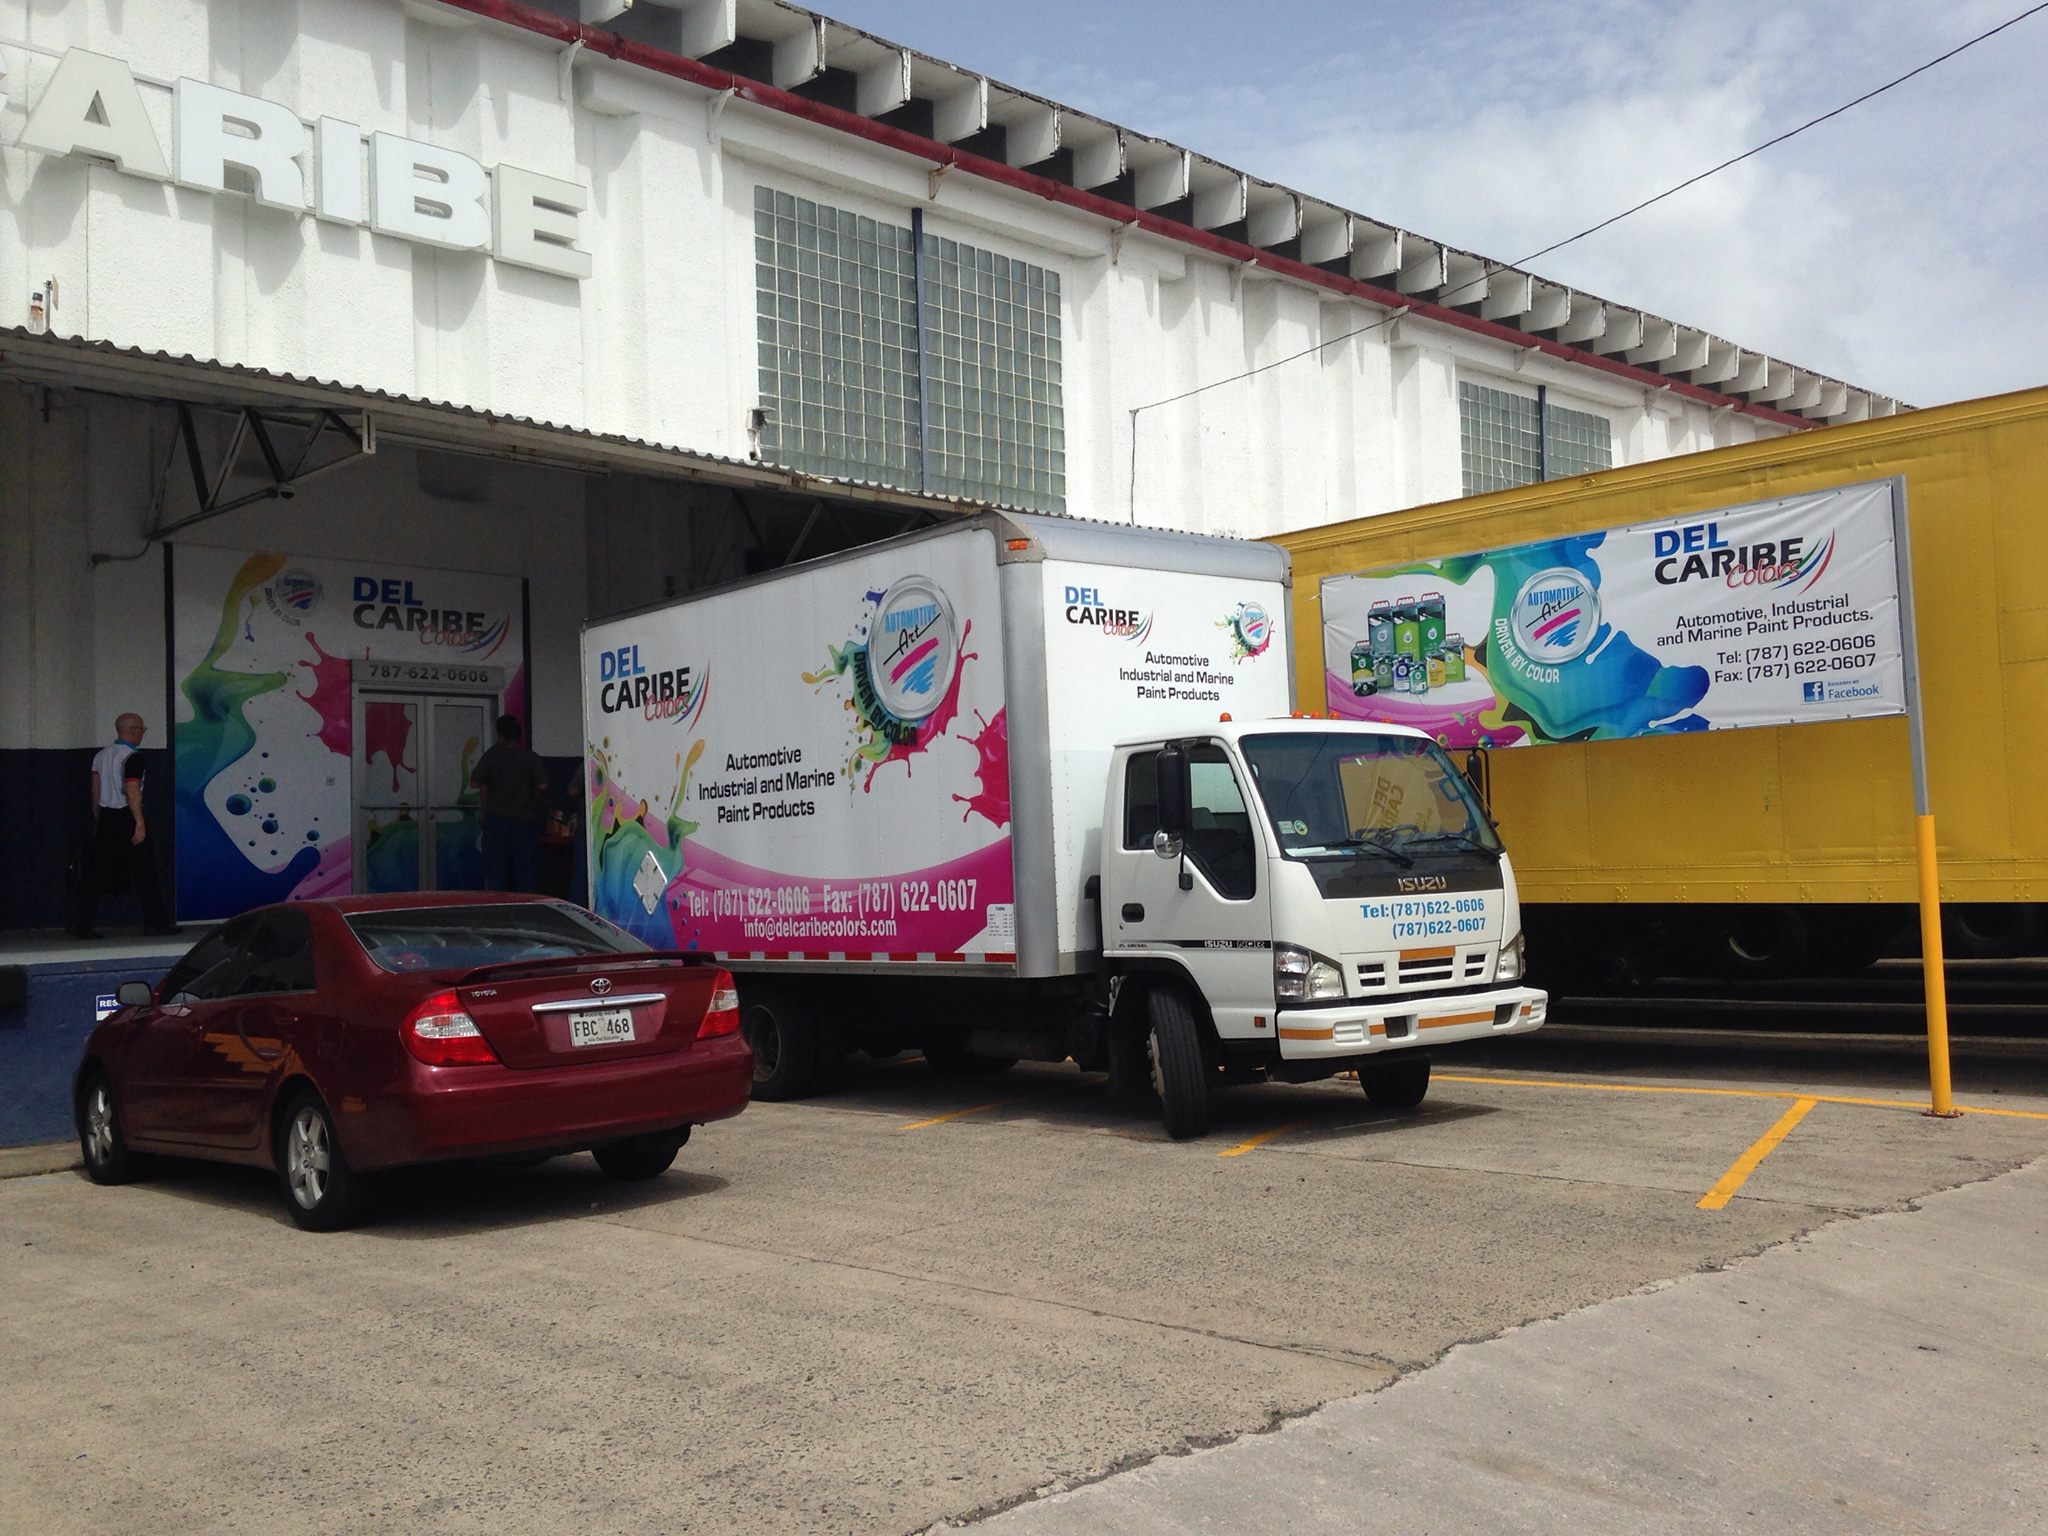 Suzuki del Caribe resumes operations in Puerto Rico and the Caribbean